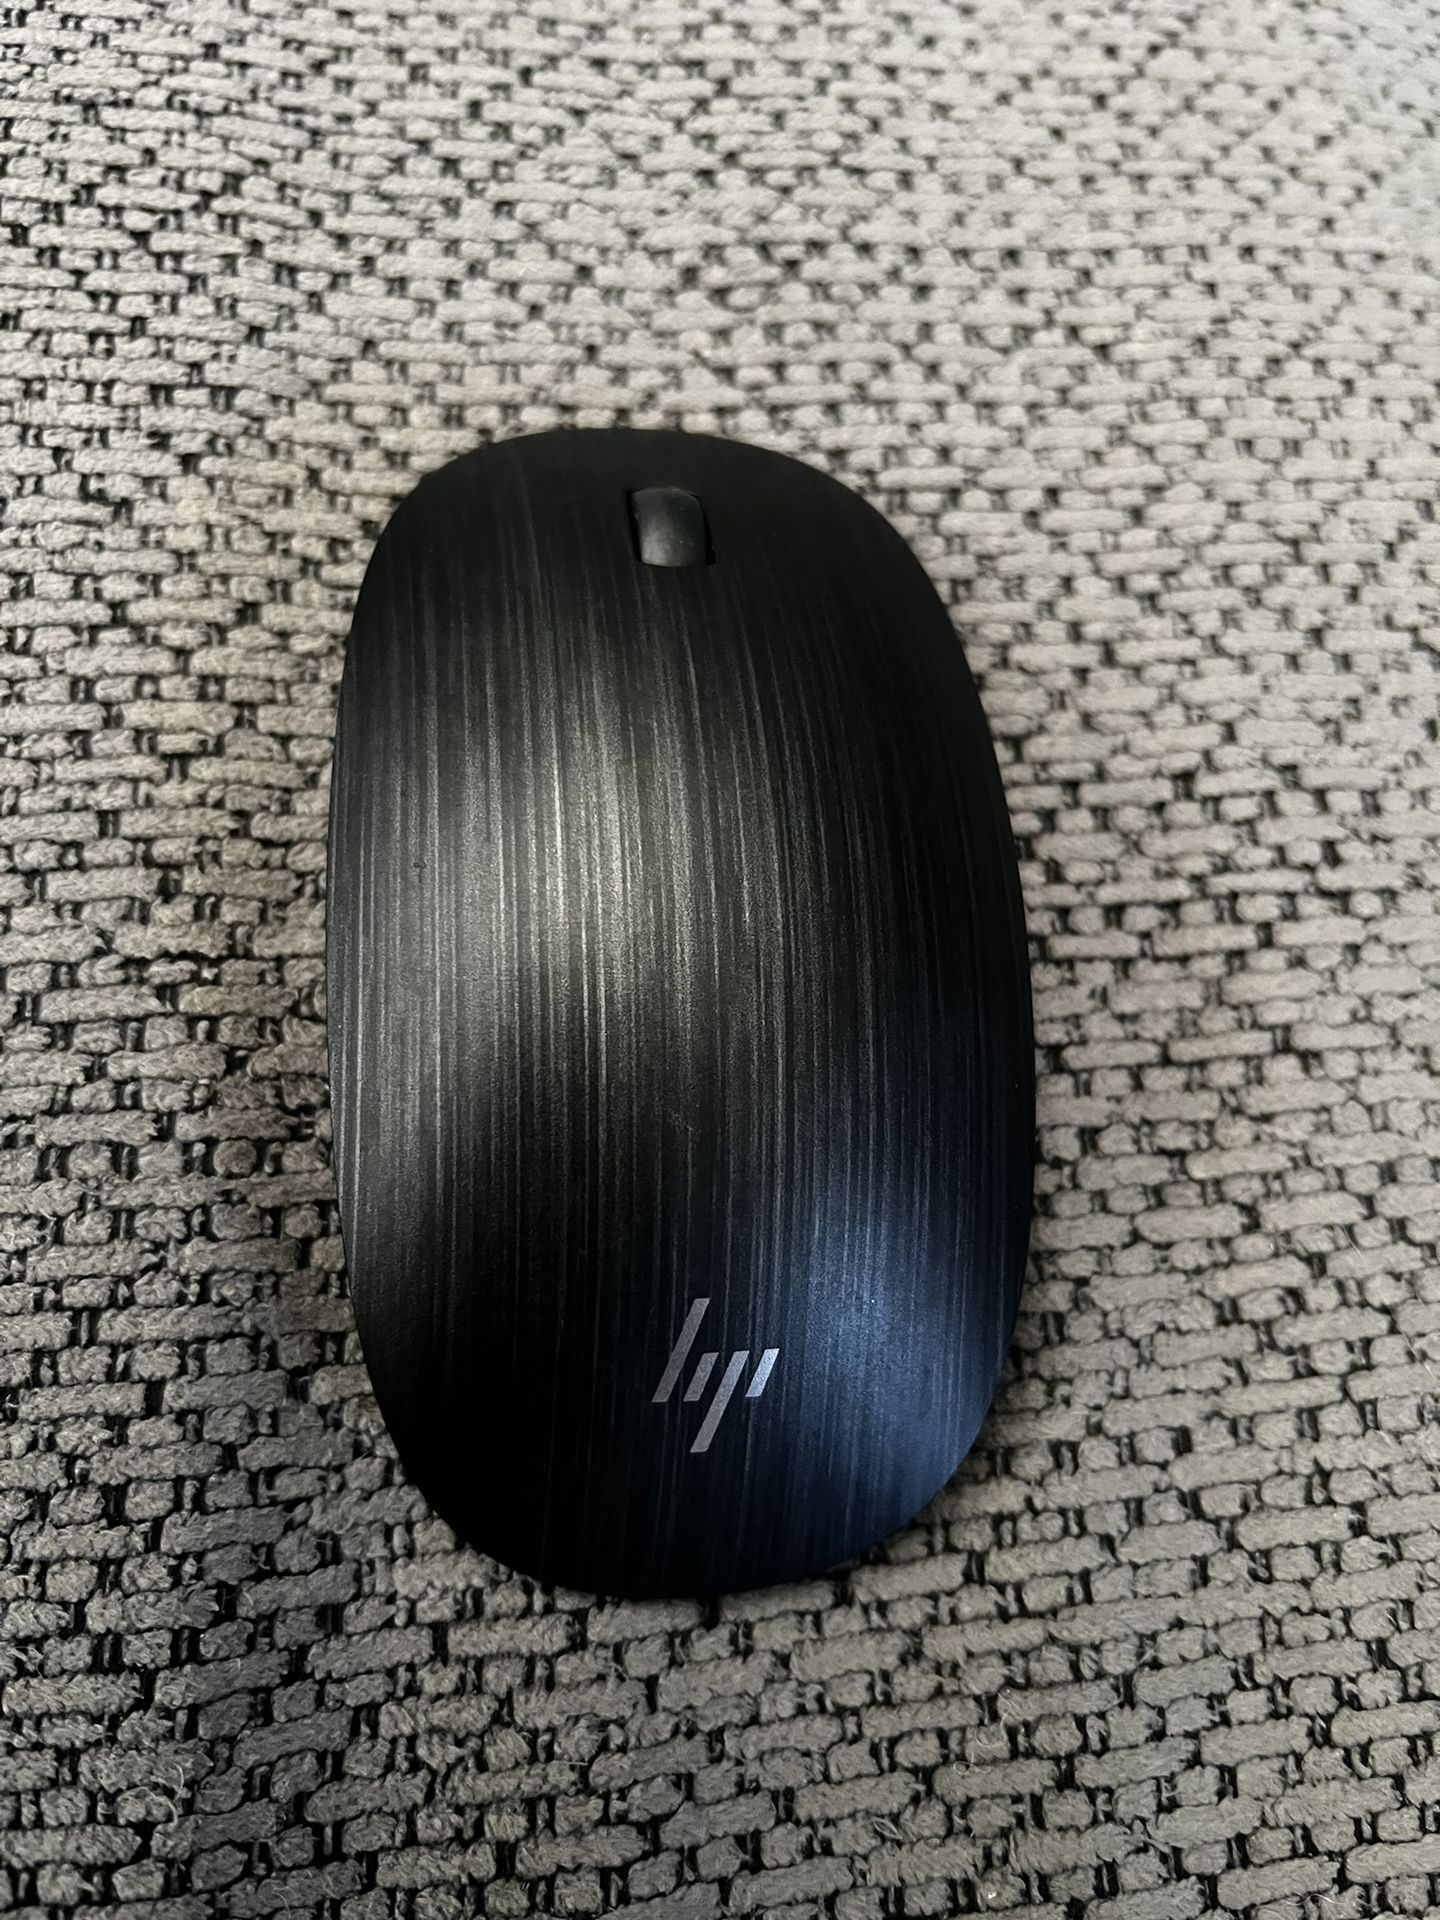 HP Mouse 